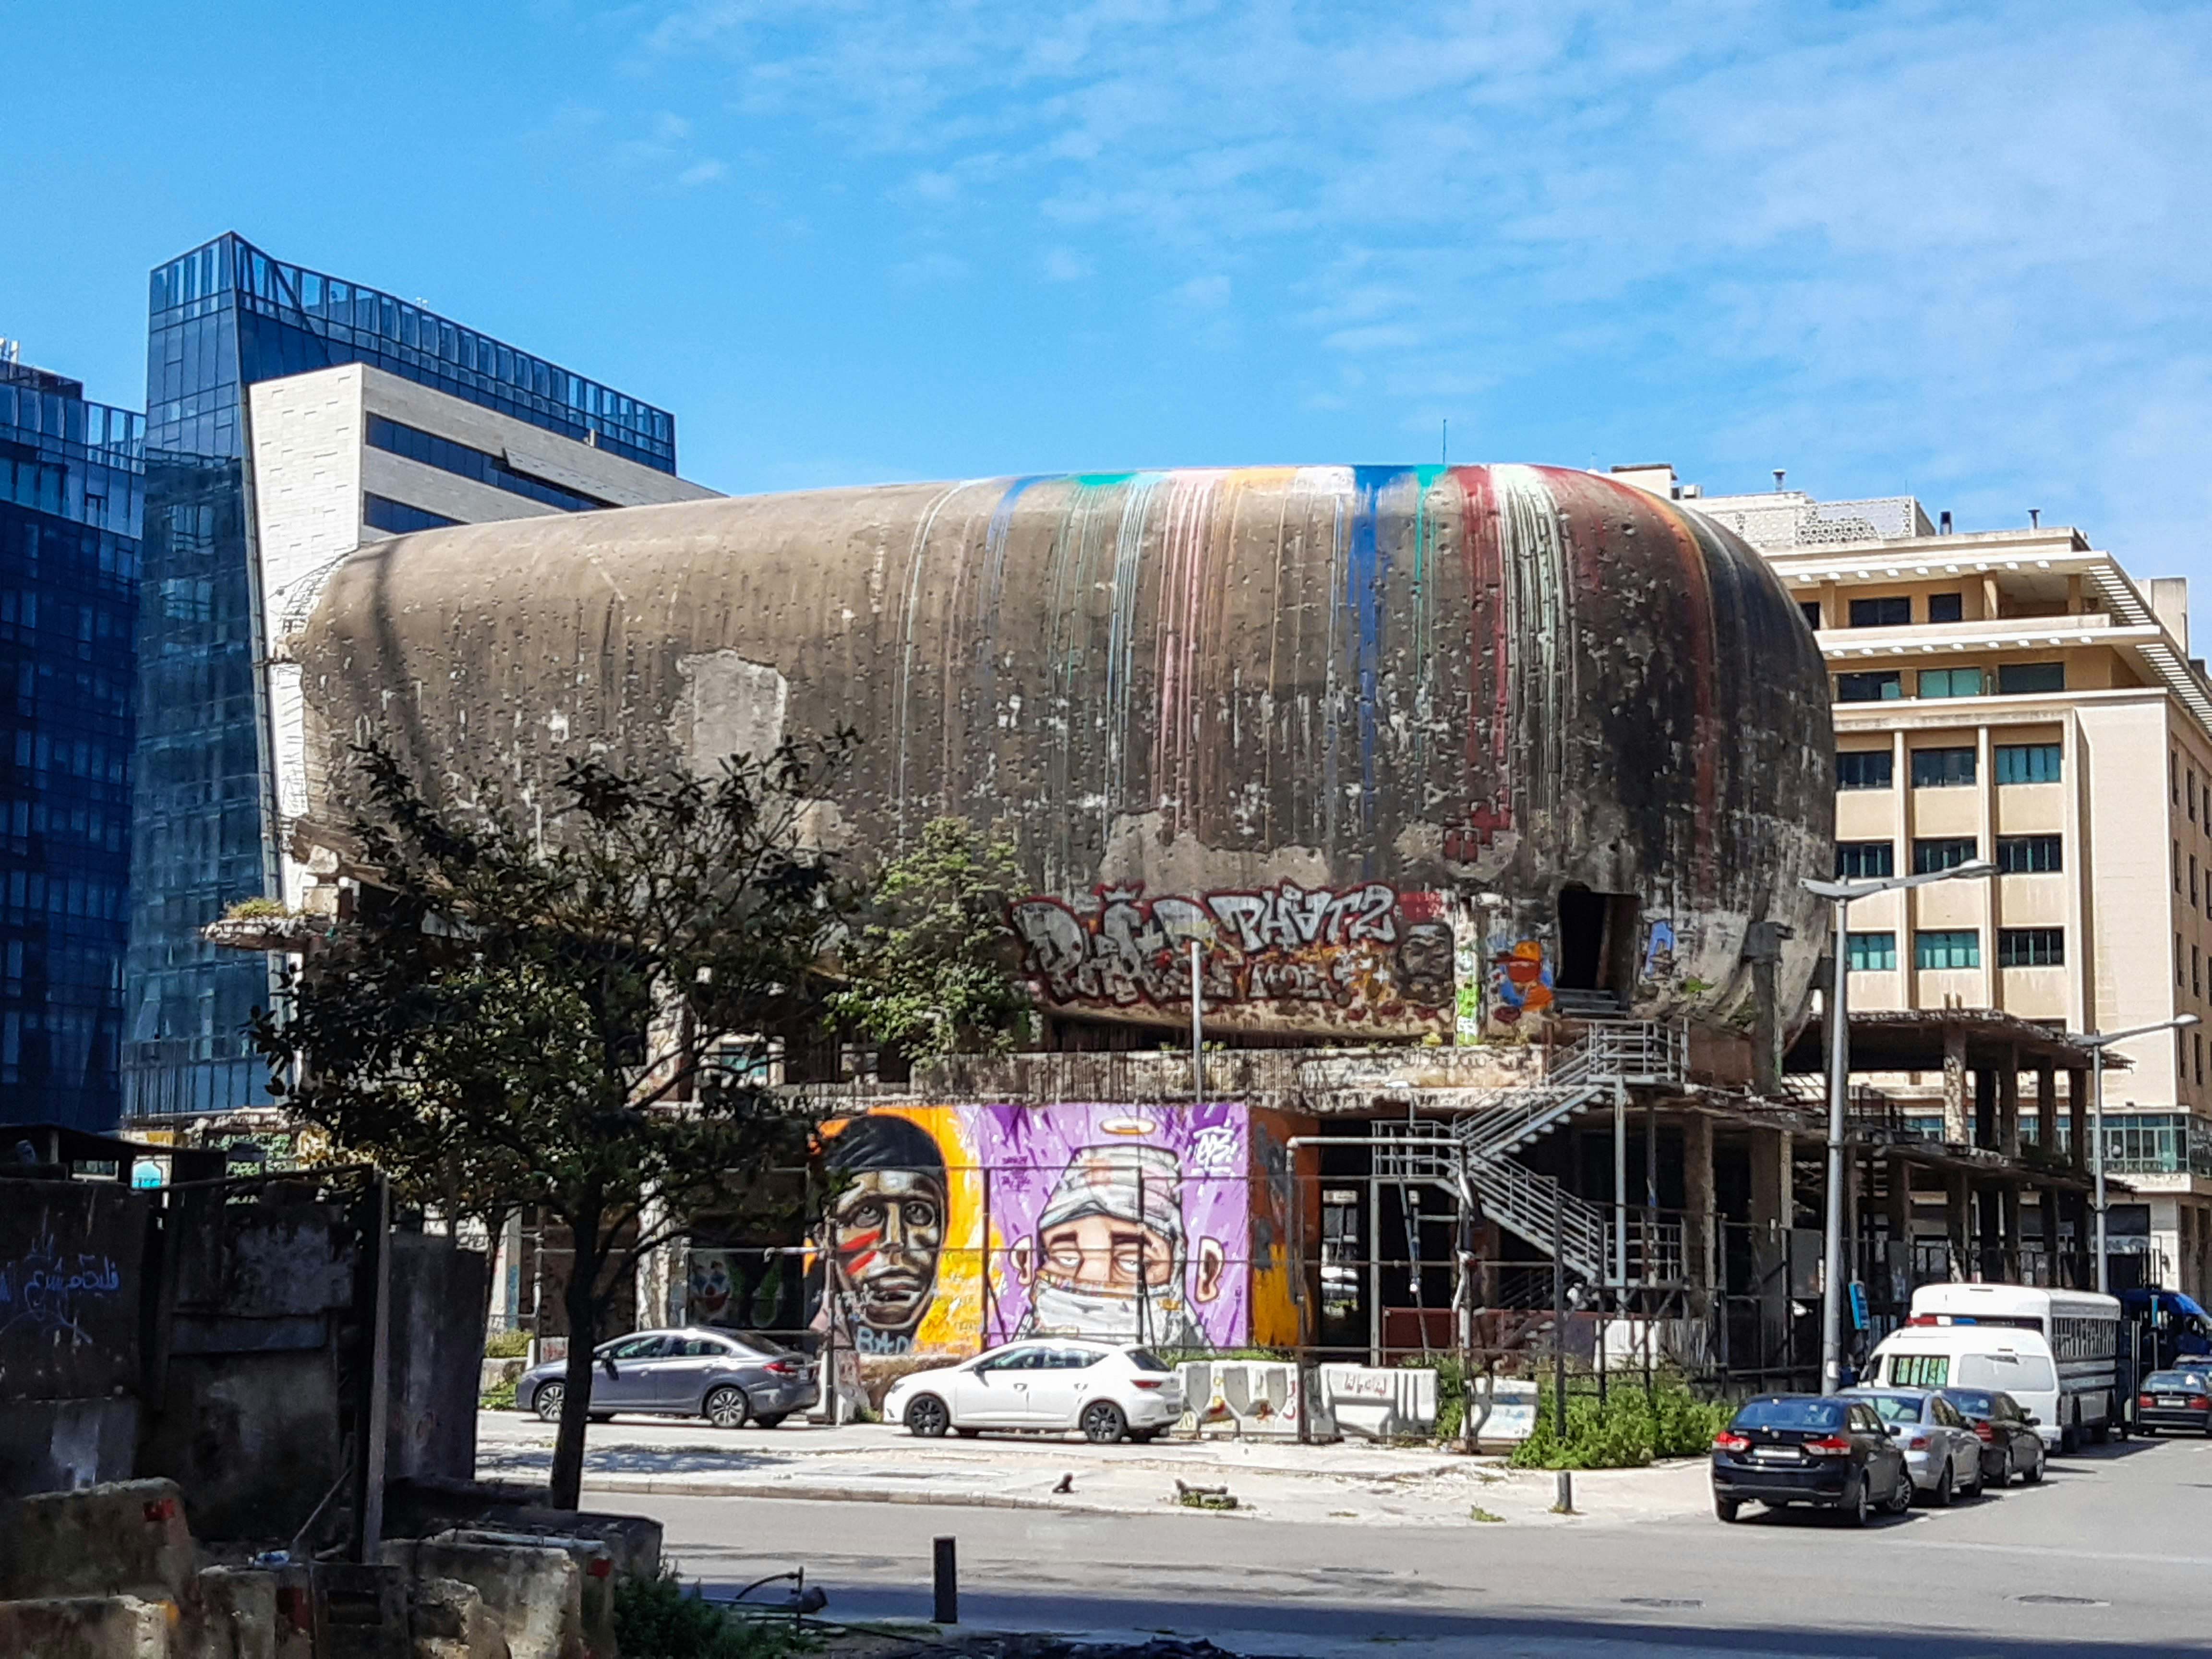 An egg-shaped building painted with graffiti 